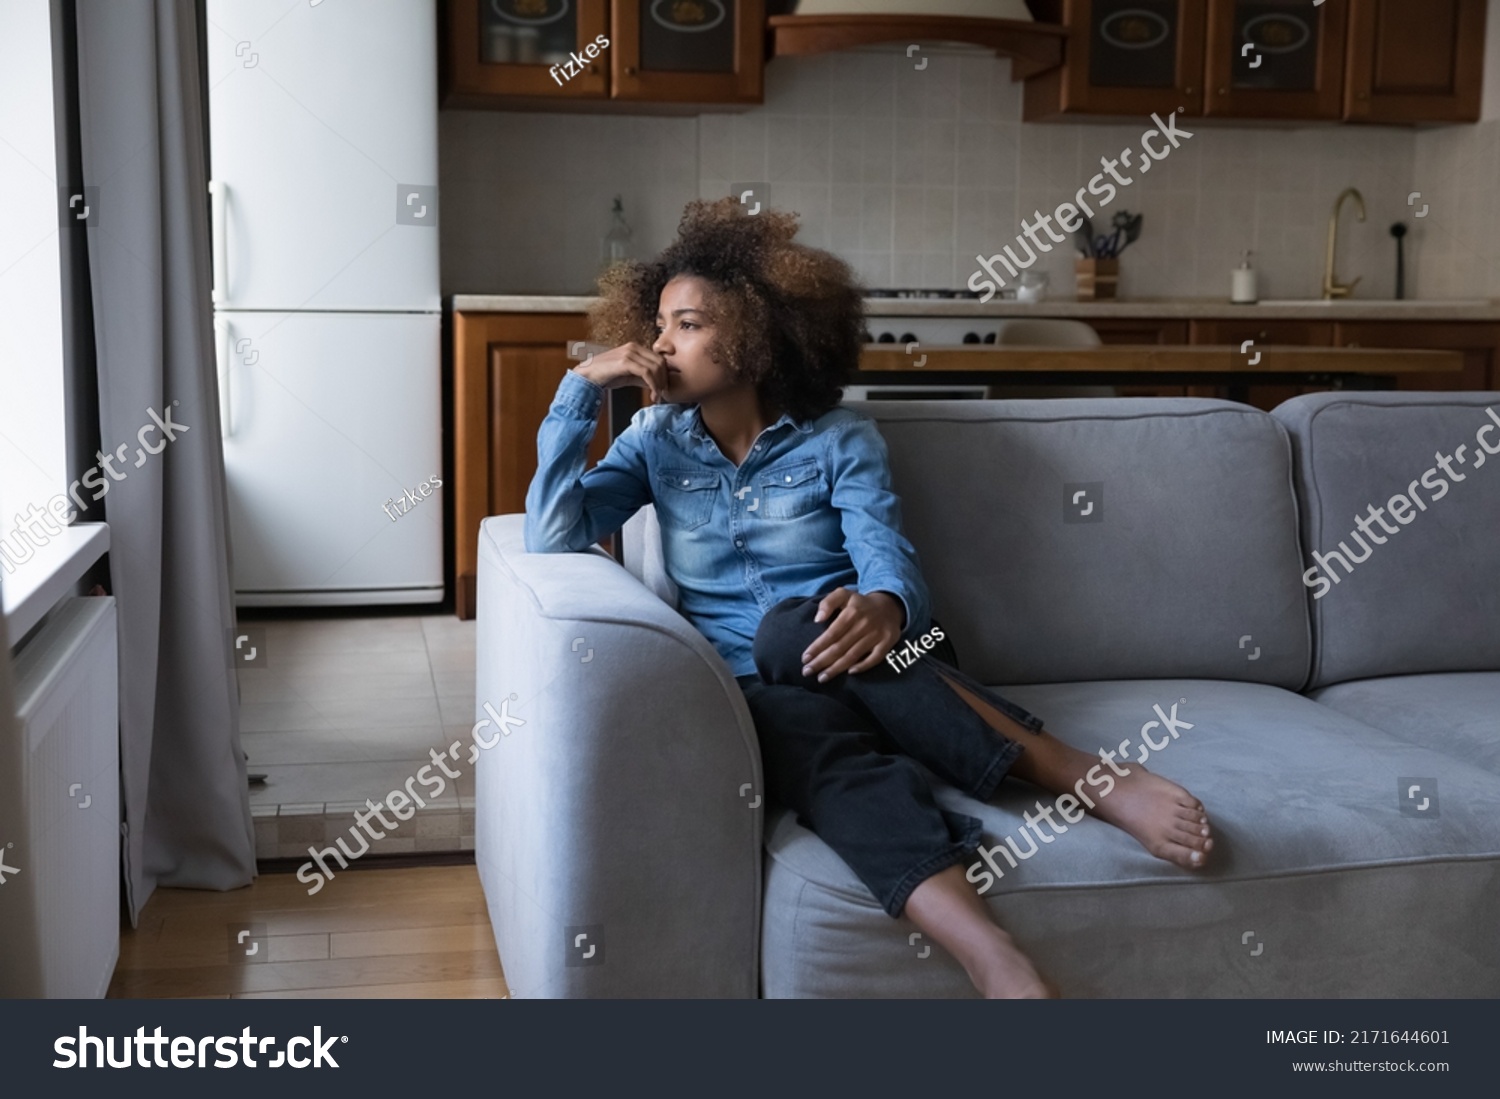 Sad African teen girl sit on sofa lost in thoughts, thinks staring into distance, looks upset experiences first unrequited love, having low self-esteem, problems, feels insecure. Teen problem concept #2171644601